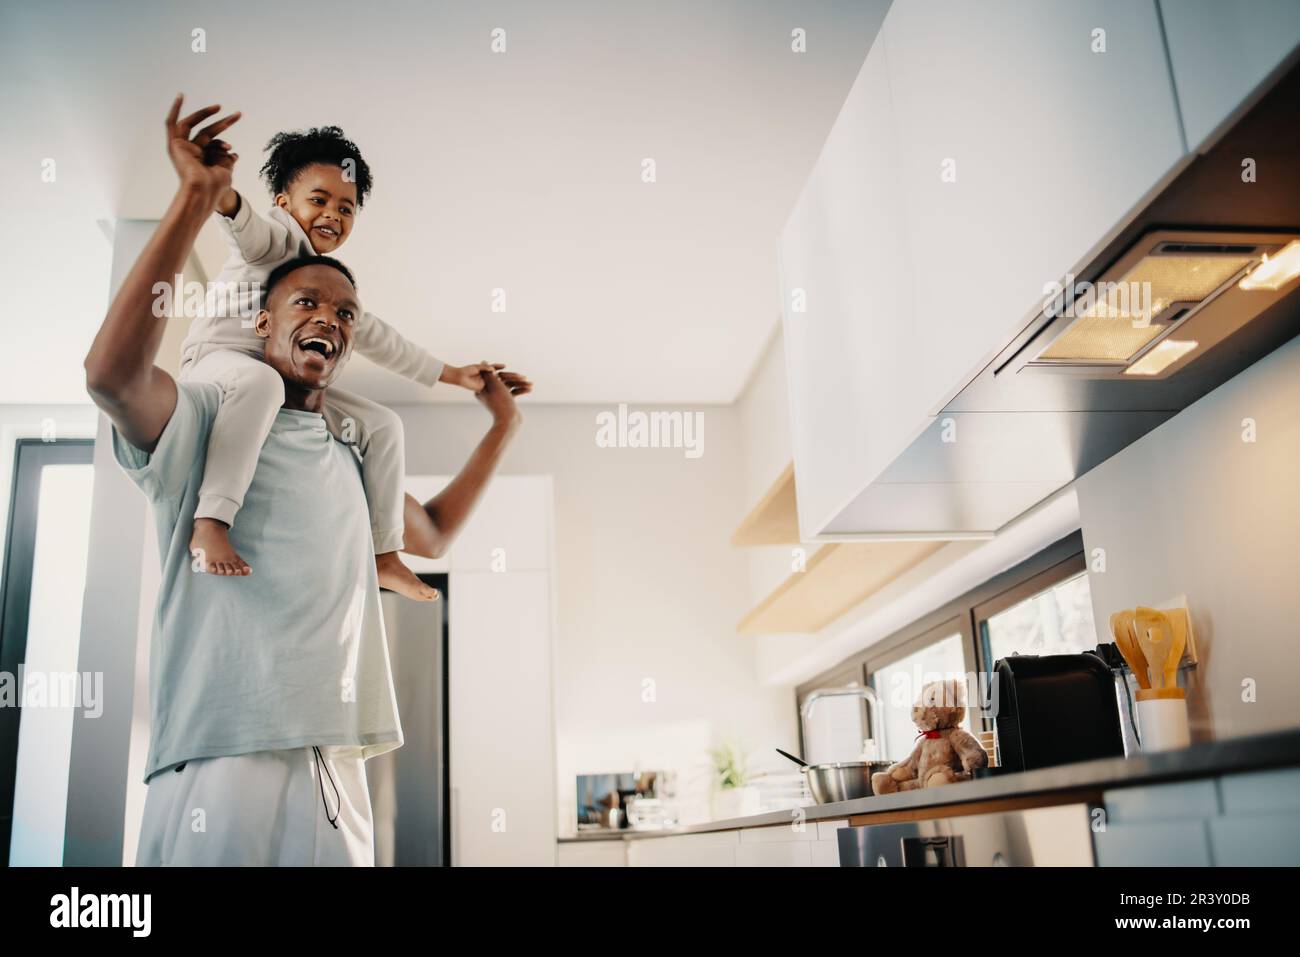 Dad dances with his daughter sitting on his shoulders. Father entertains and plays with his daughter in the morning. Happy moments shared between a si Stock Photo